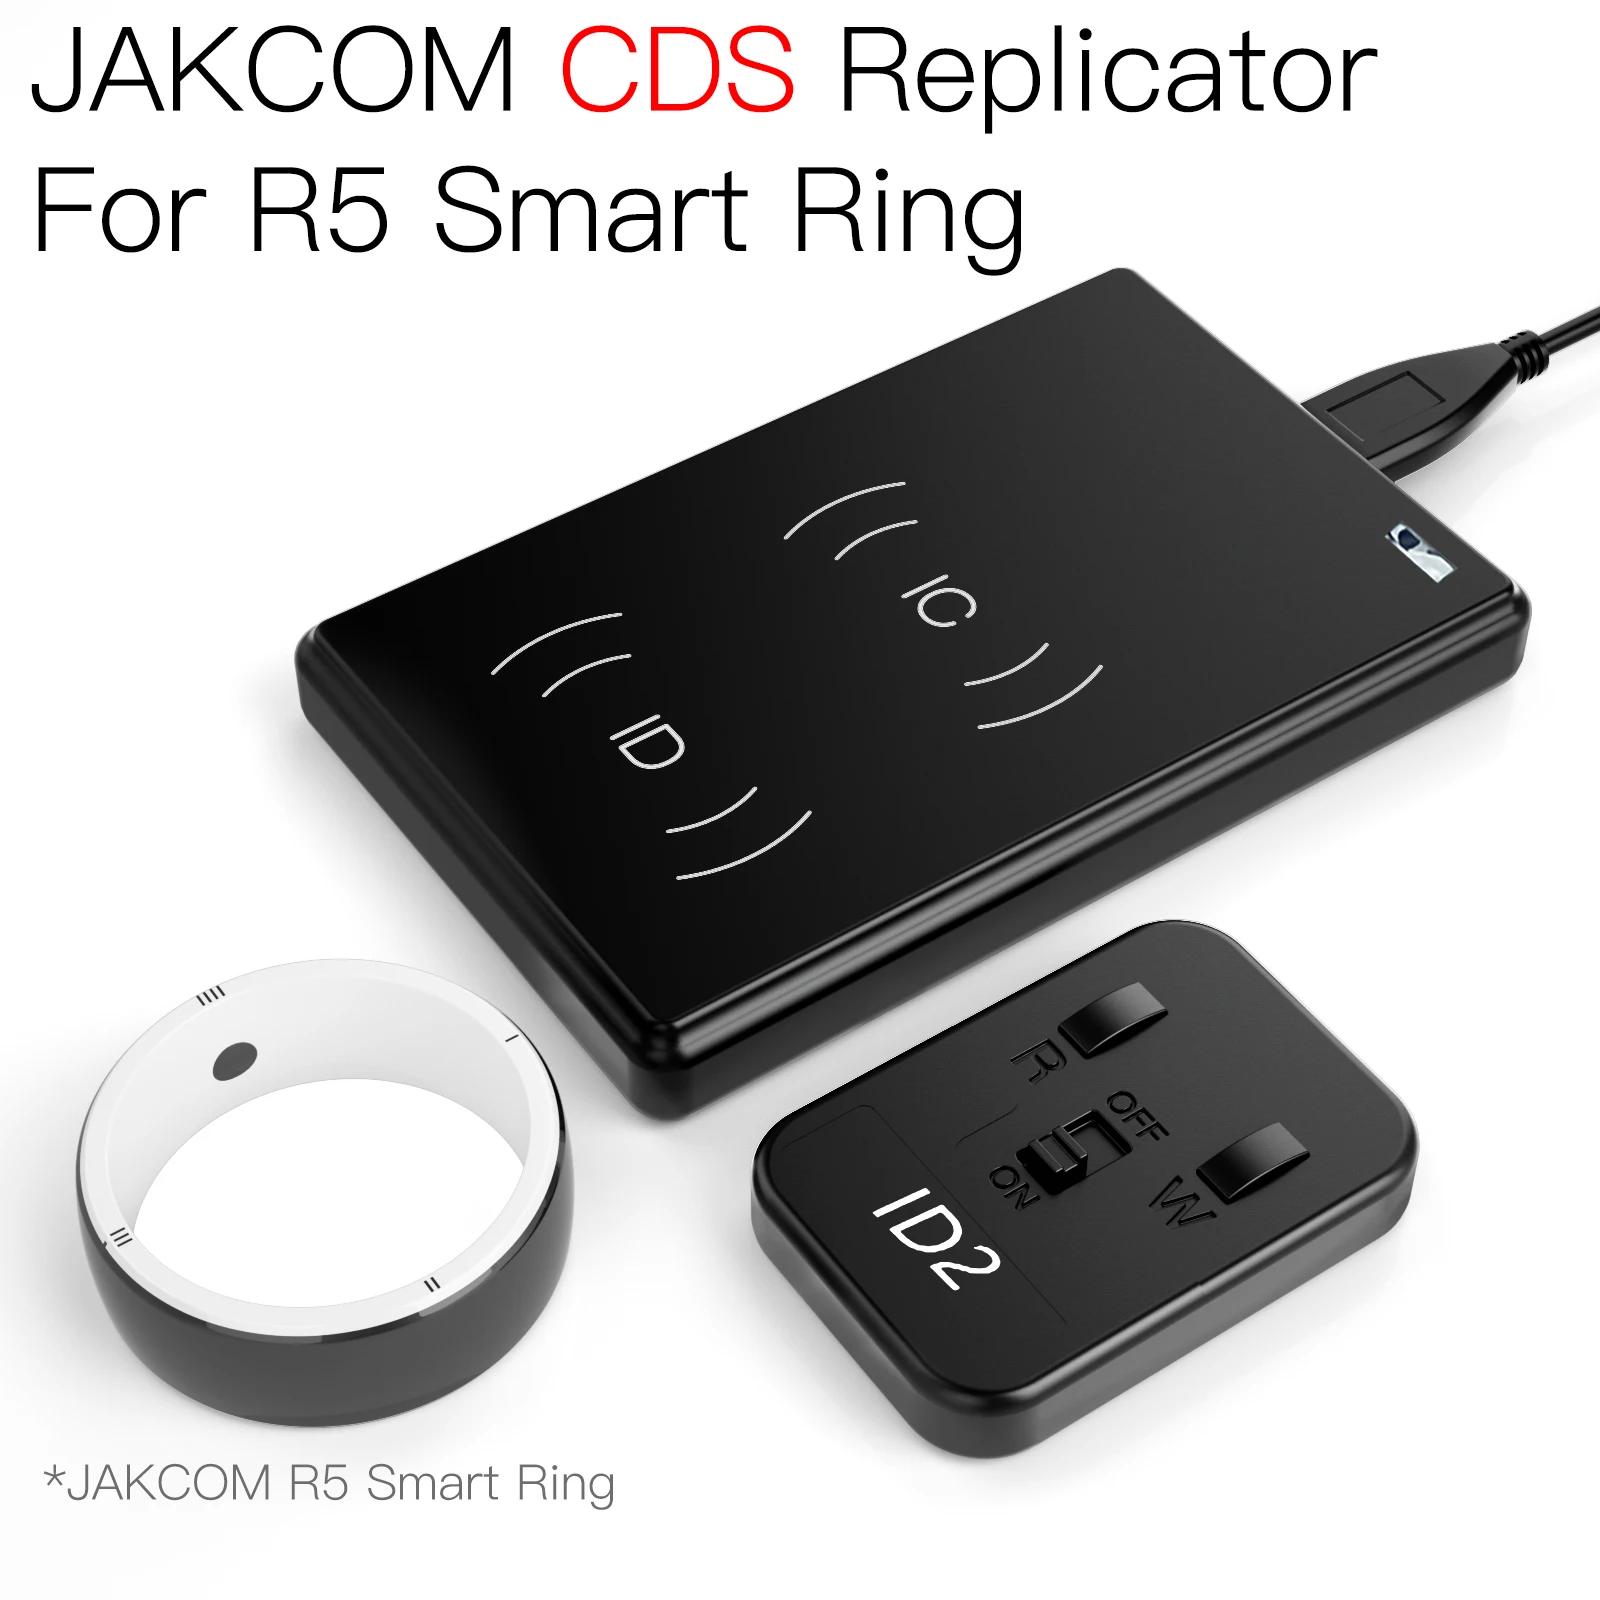 

JAKCOM CDS RFID Replicator for R5 Smart Ring Copy IC and ID Cards New Product of Security protection access card reader 303007